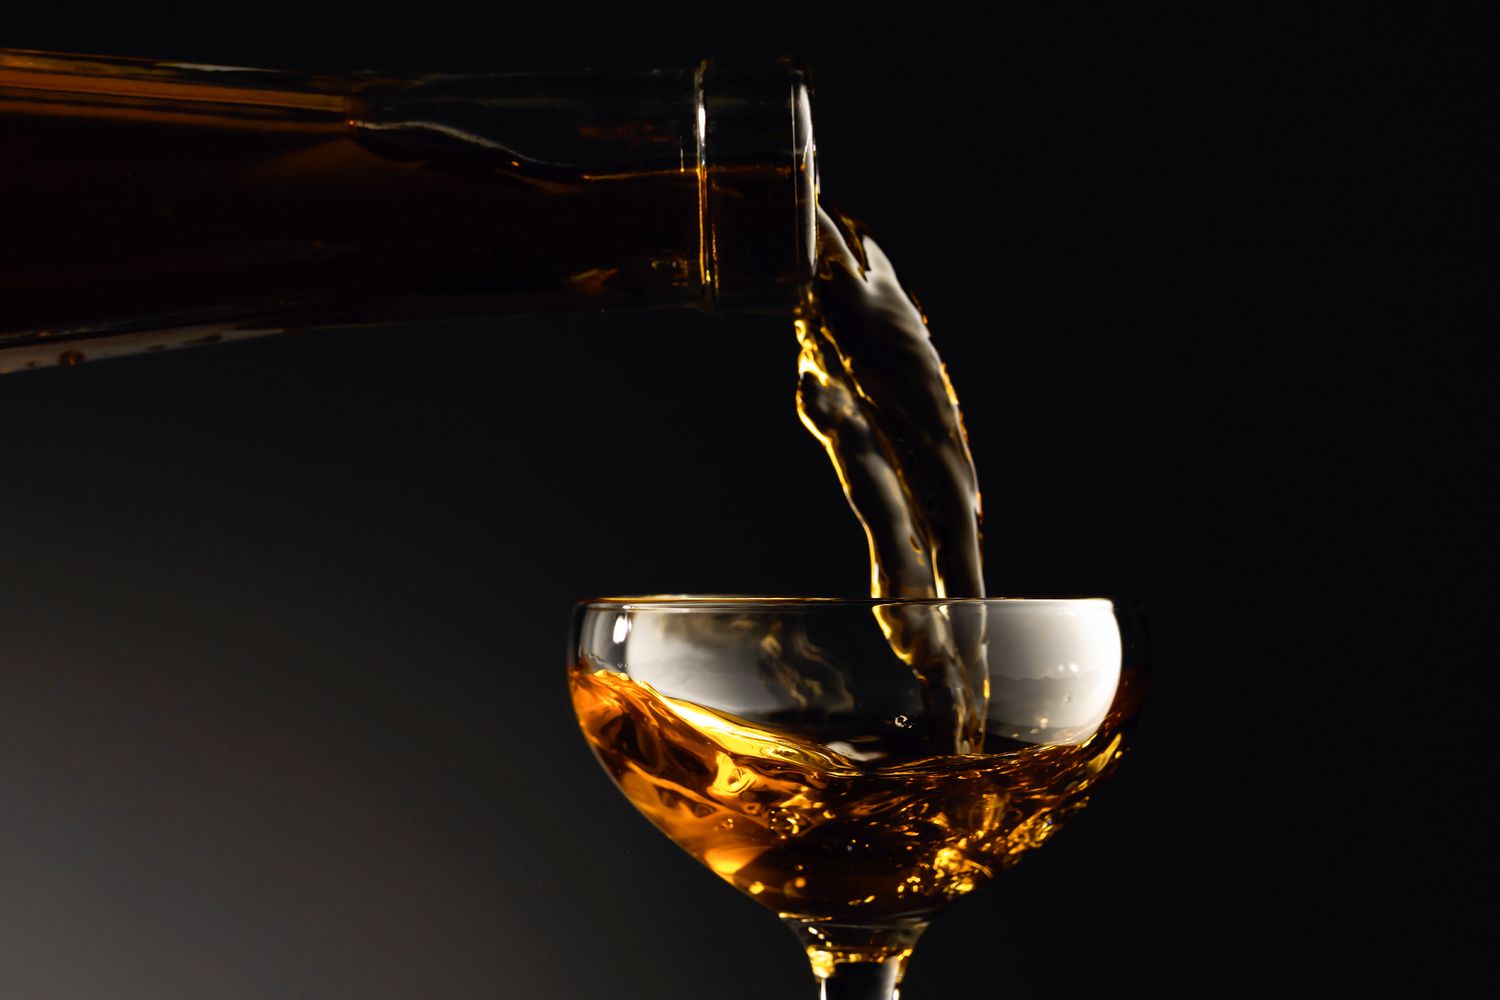 Substitute for Marsala Wine: Finding Alternatives for Cooking